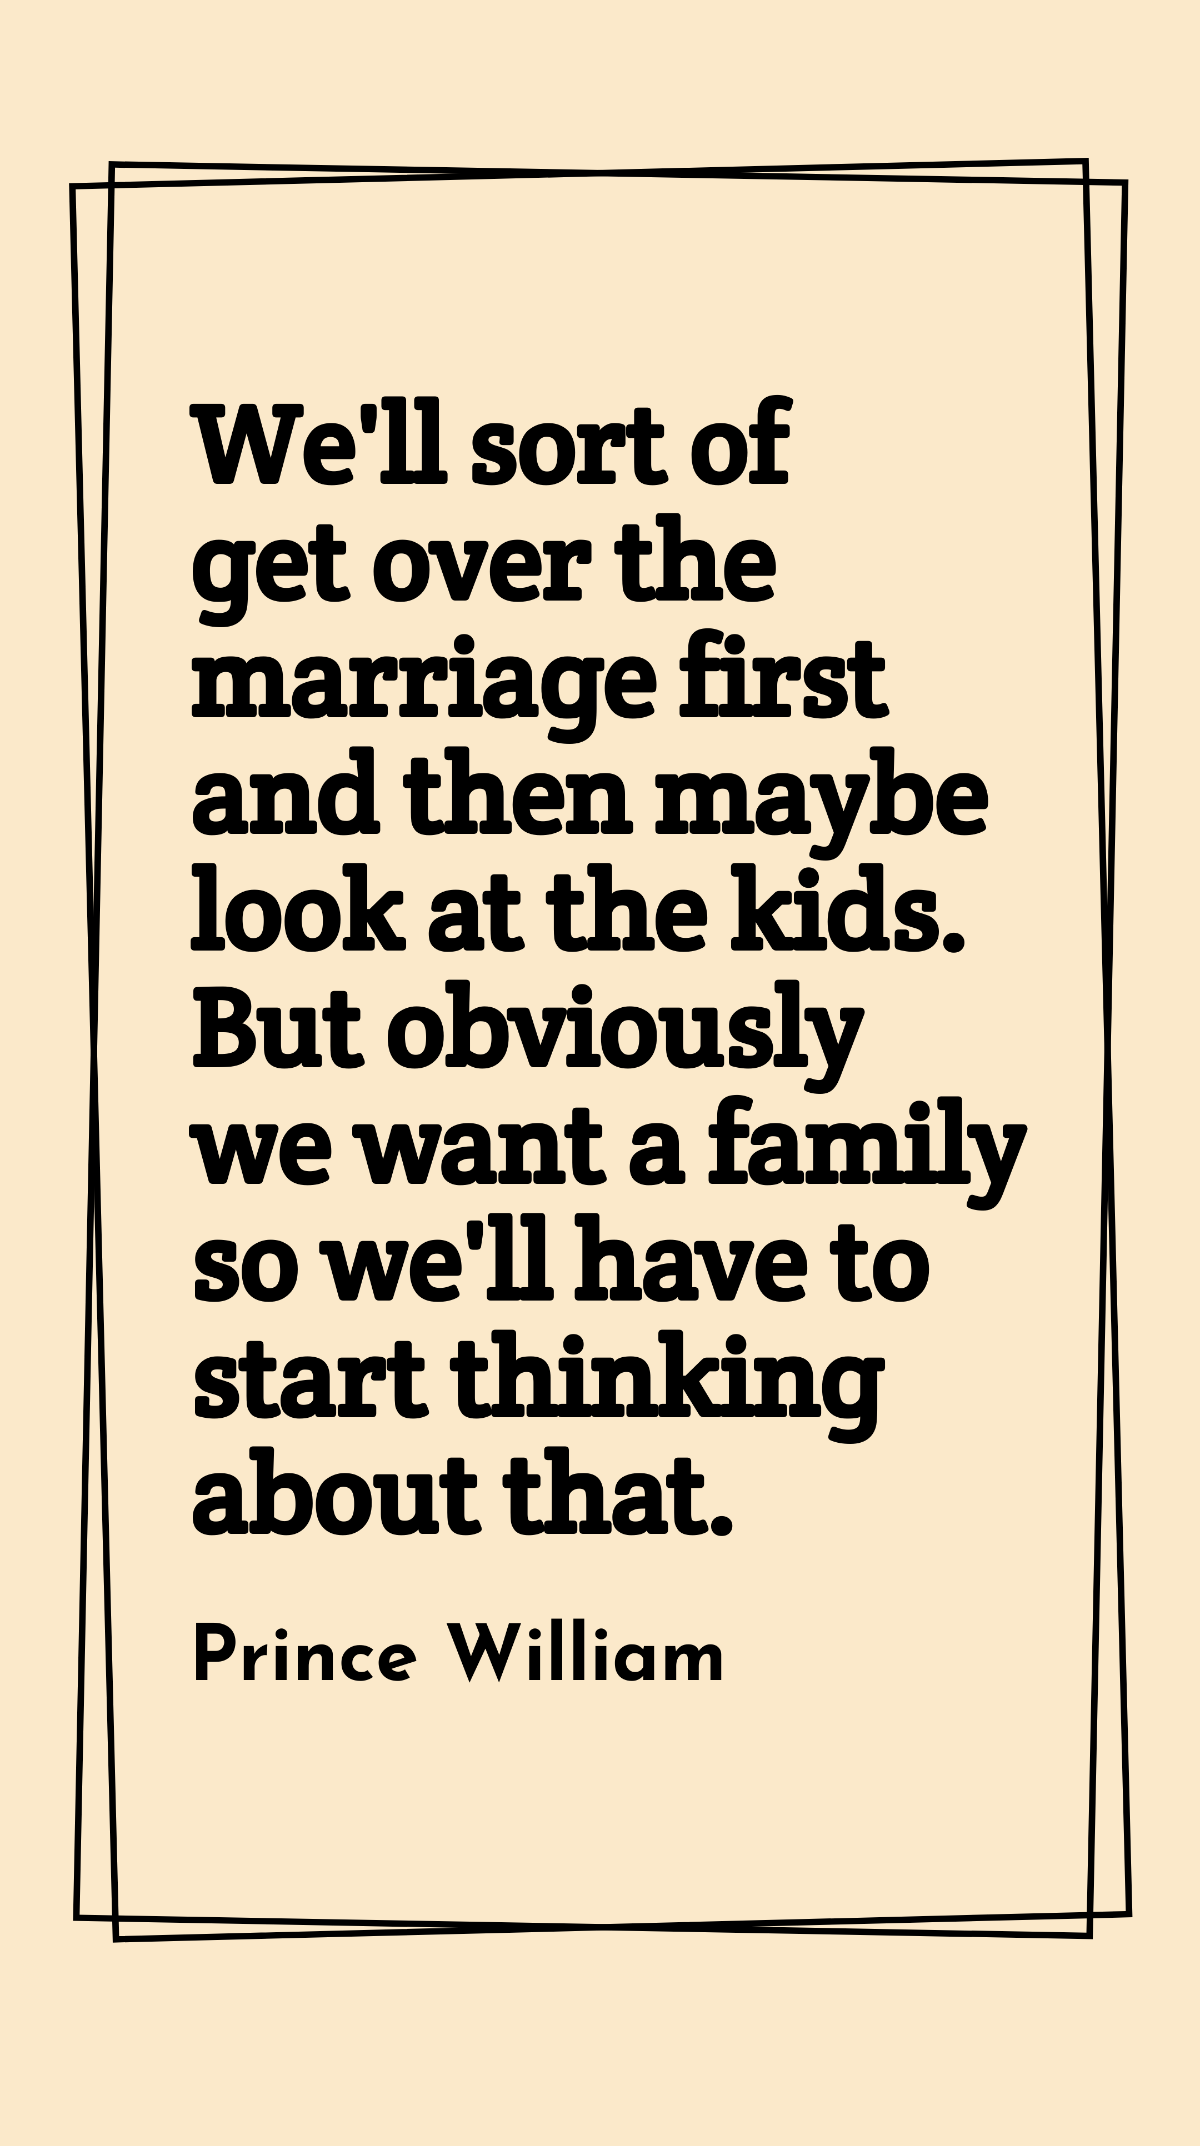 Prince William - We'll sort of get over the marriage first and then maybe look at the kids. But obviously we want a family so we'll have to start thinking about that.